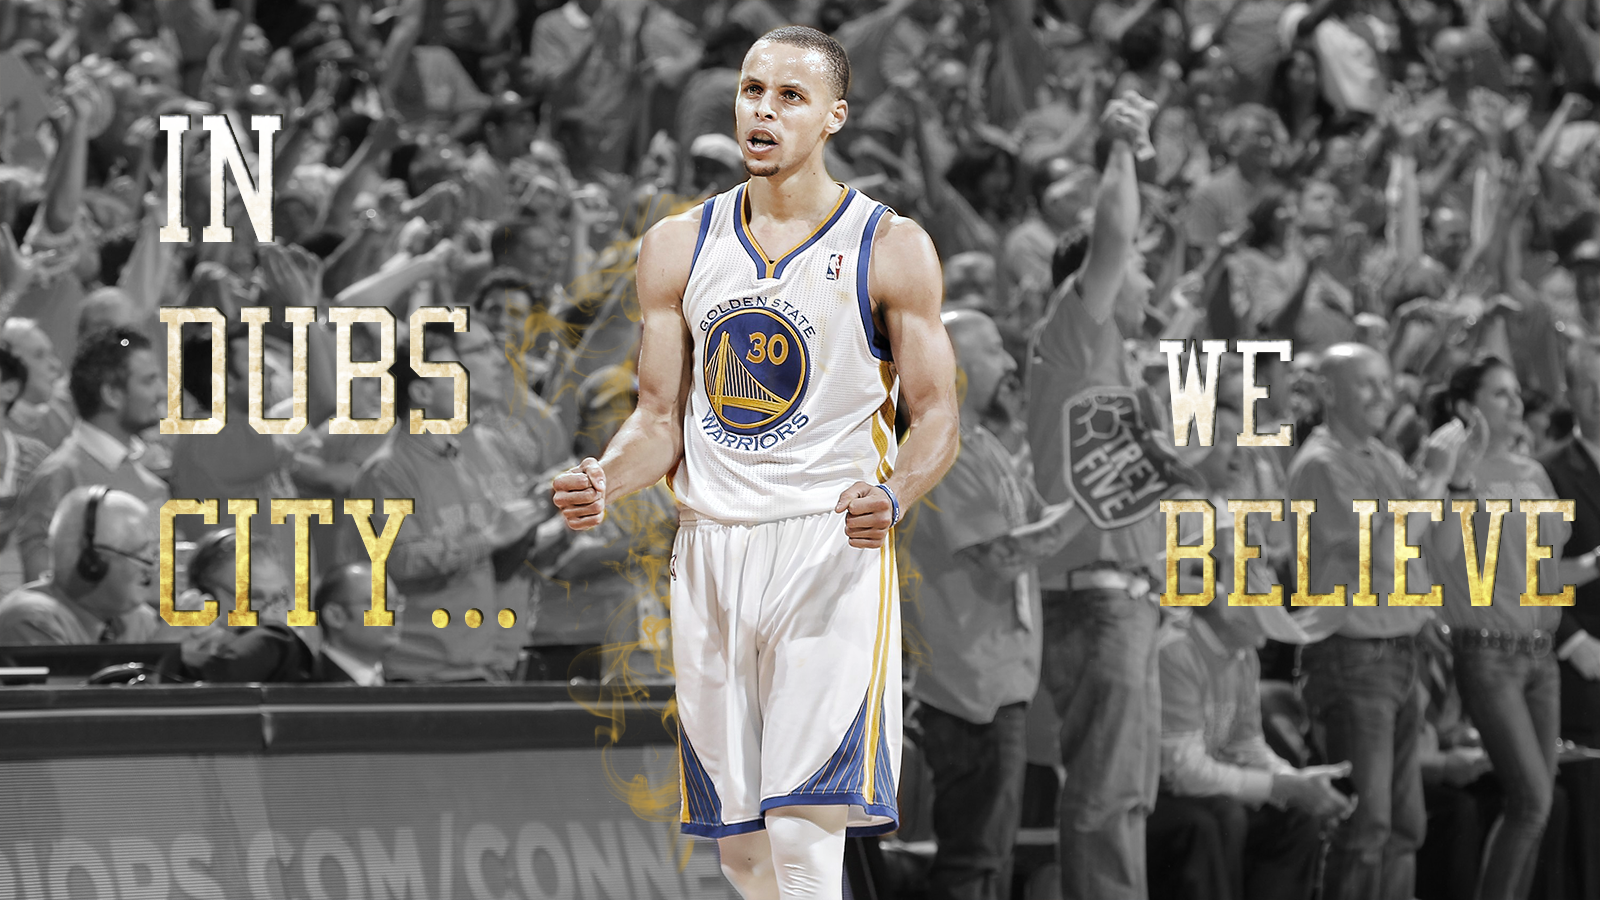 HD Stephen Curry Wallpaper Collection